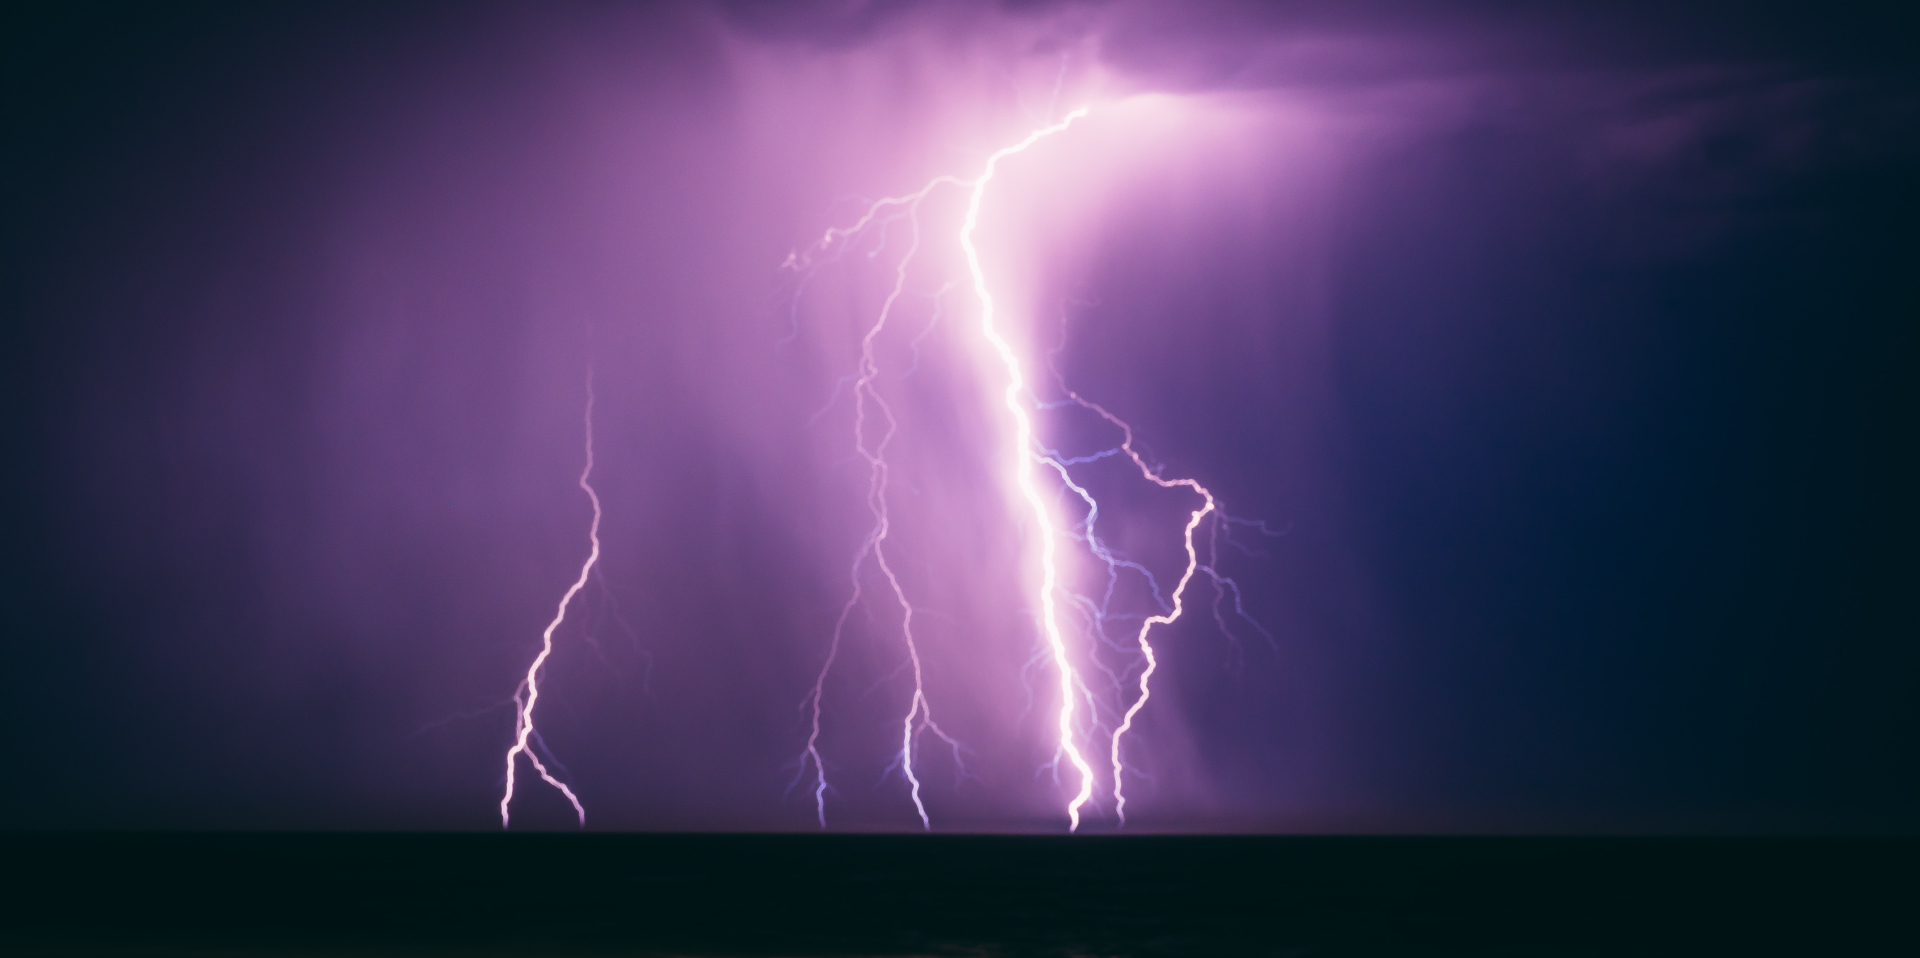 10 striking facts about lightning - Met Office